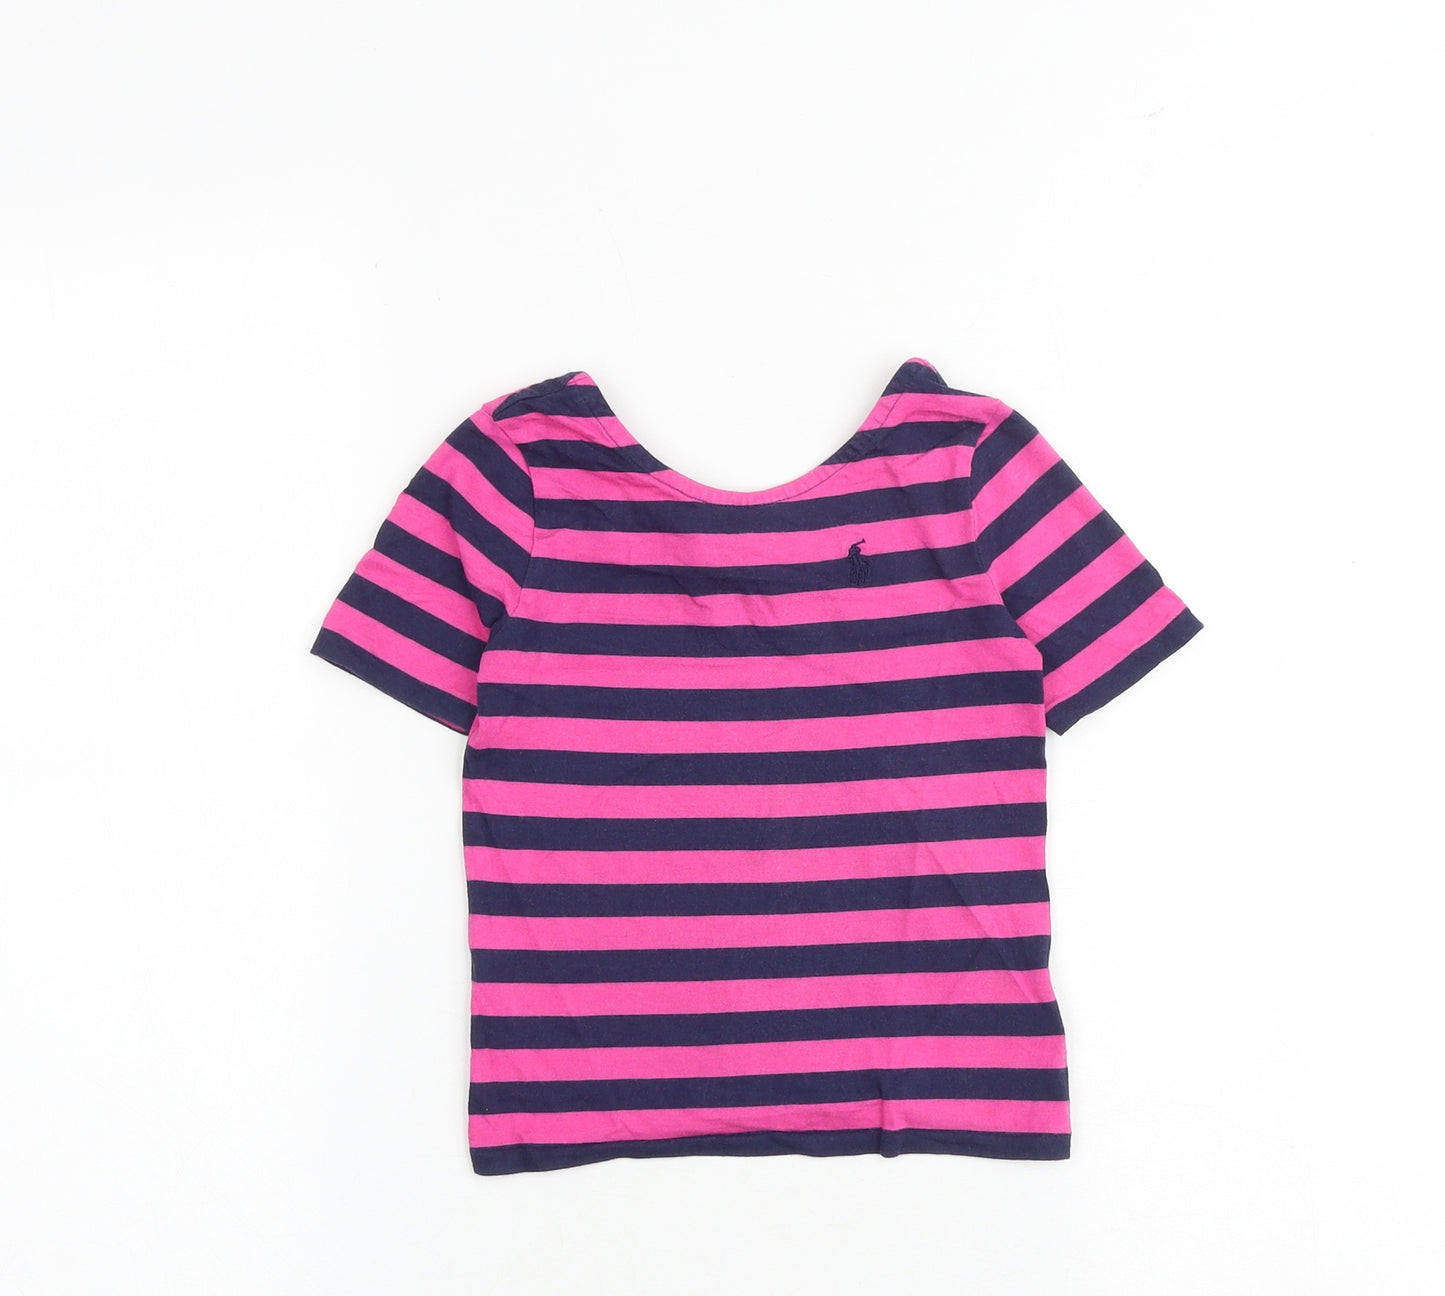 Polo Ralph Lauren Girls Pink Striped 100% Cotton Basic T-Shirt Size 5 Years Round Neck Pullover